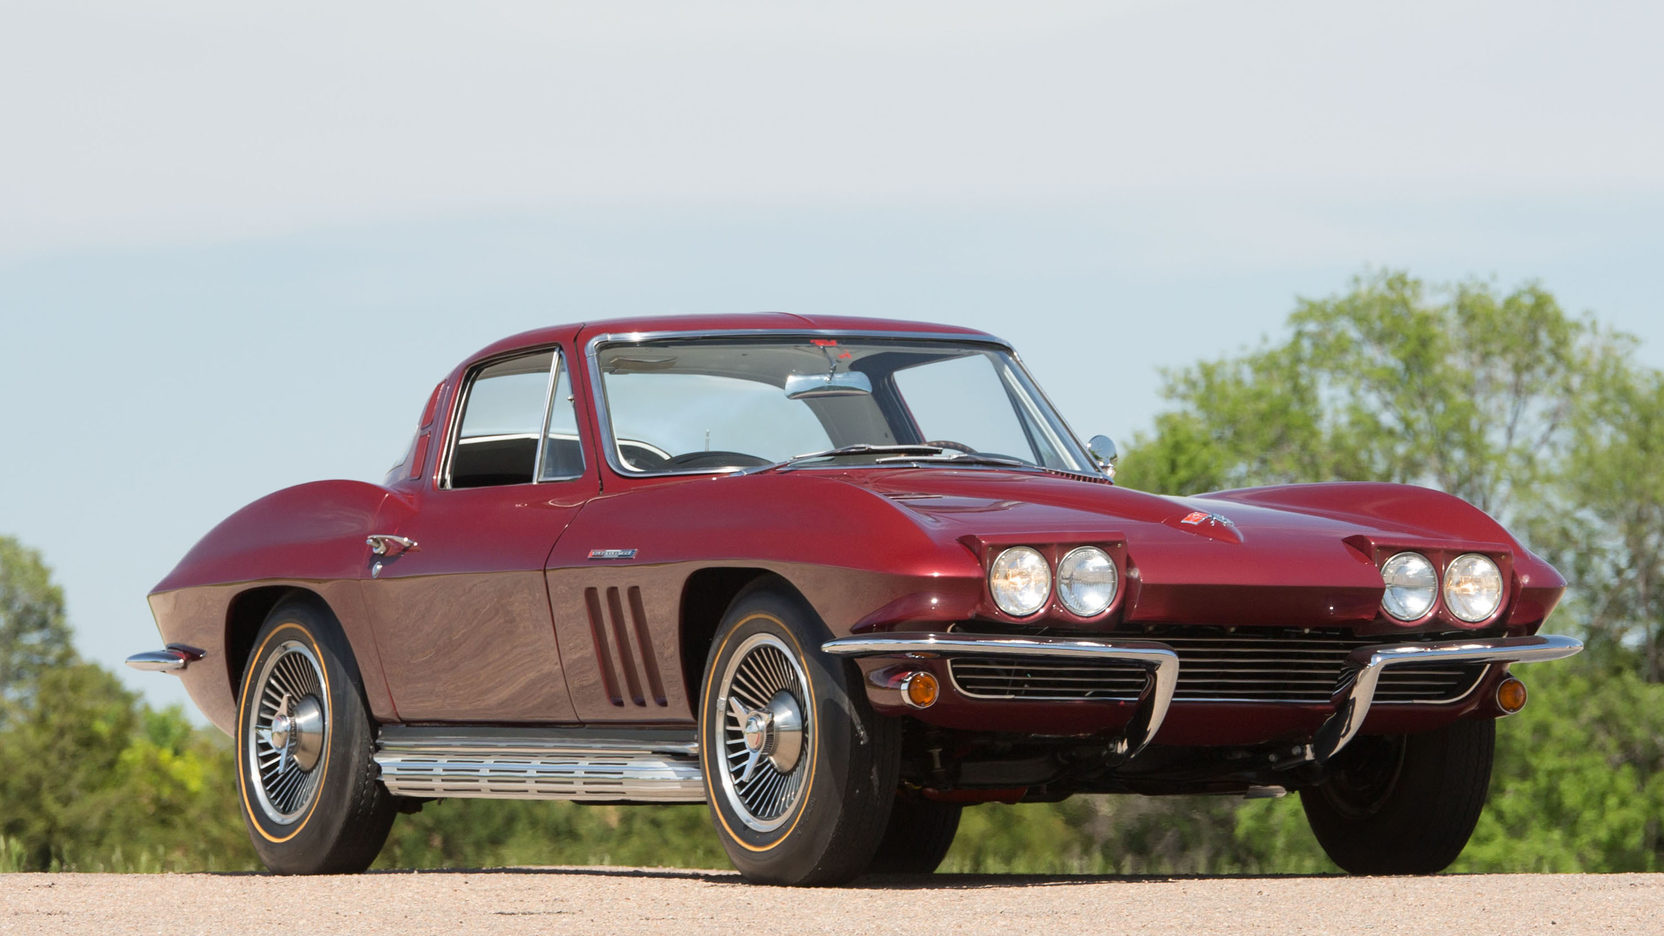 Introduced in 1962 the second model (C2) Corvette featured fully independent front and rear suspension which vastly improved the car's handling.